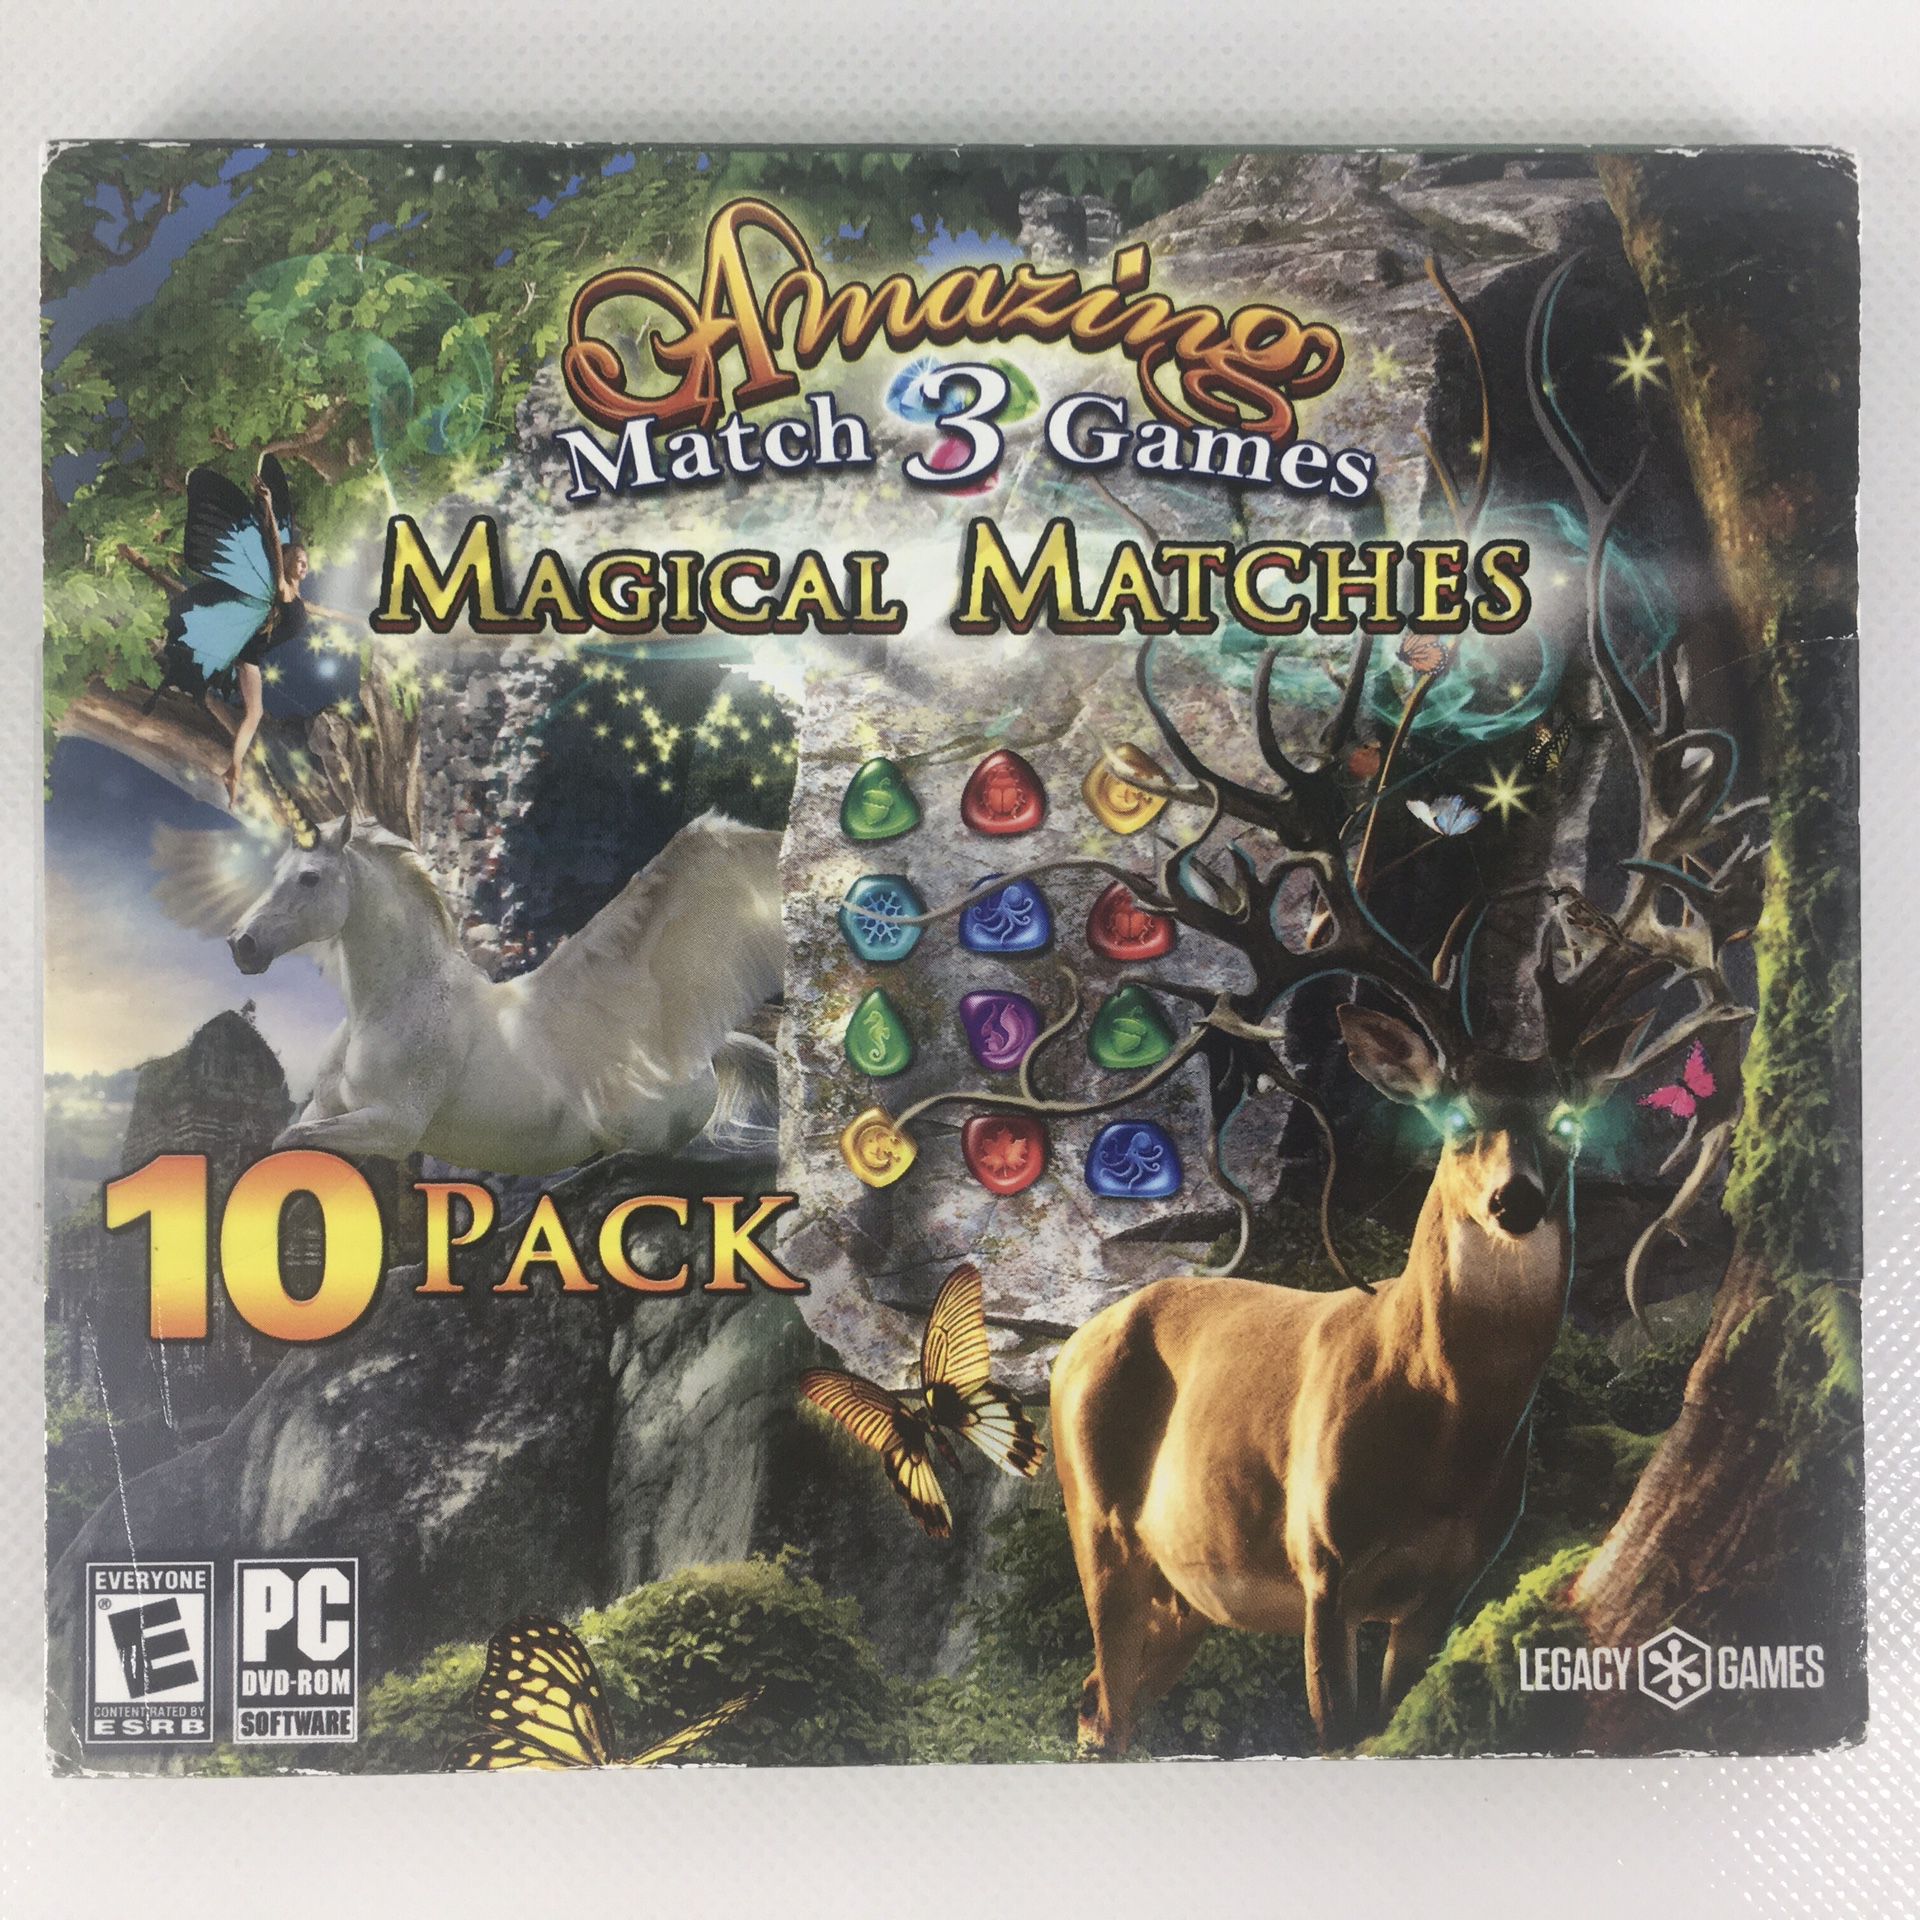 Legacy Games Amazing Match 3 Games Magical Matches 10 Pack Collection PC Video Game New Sealed